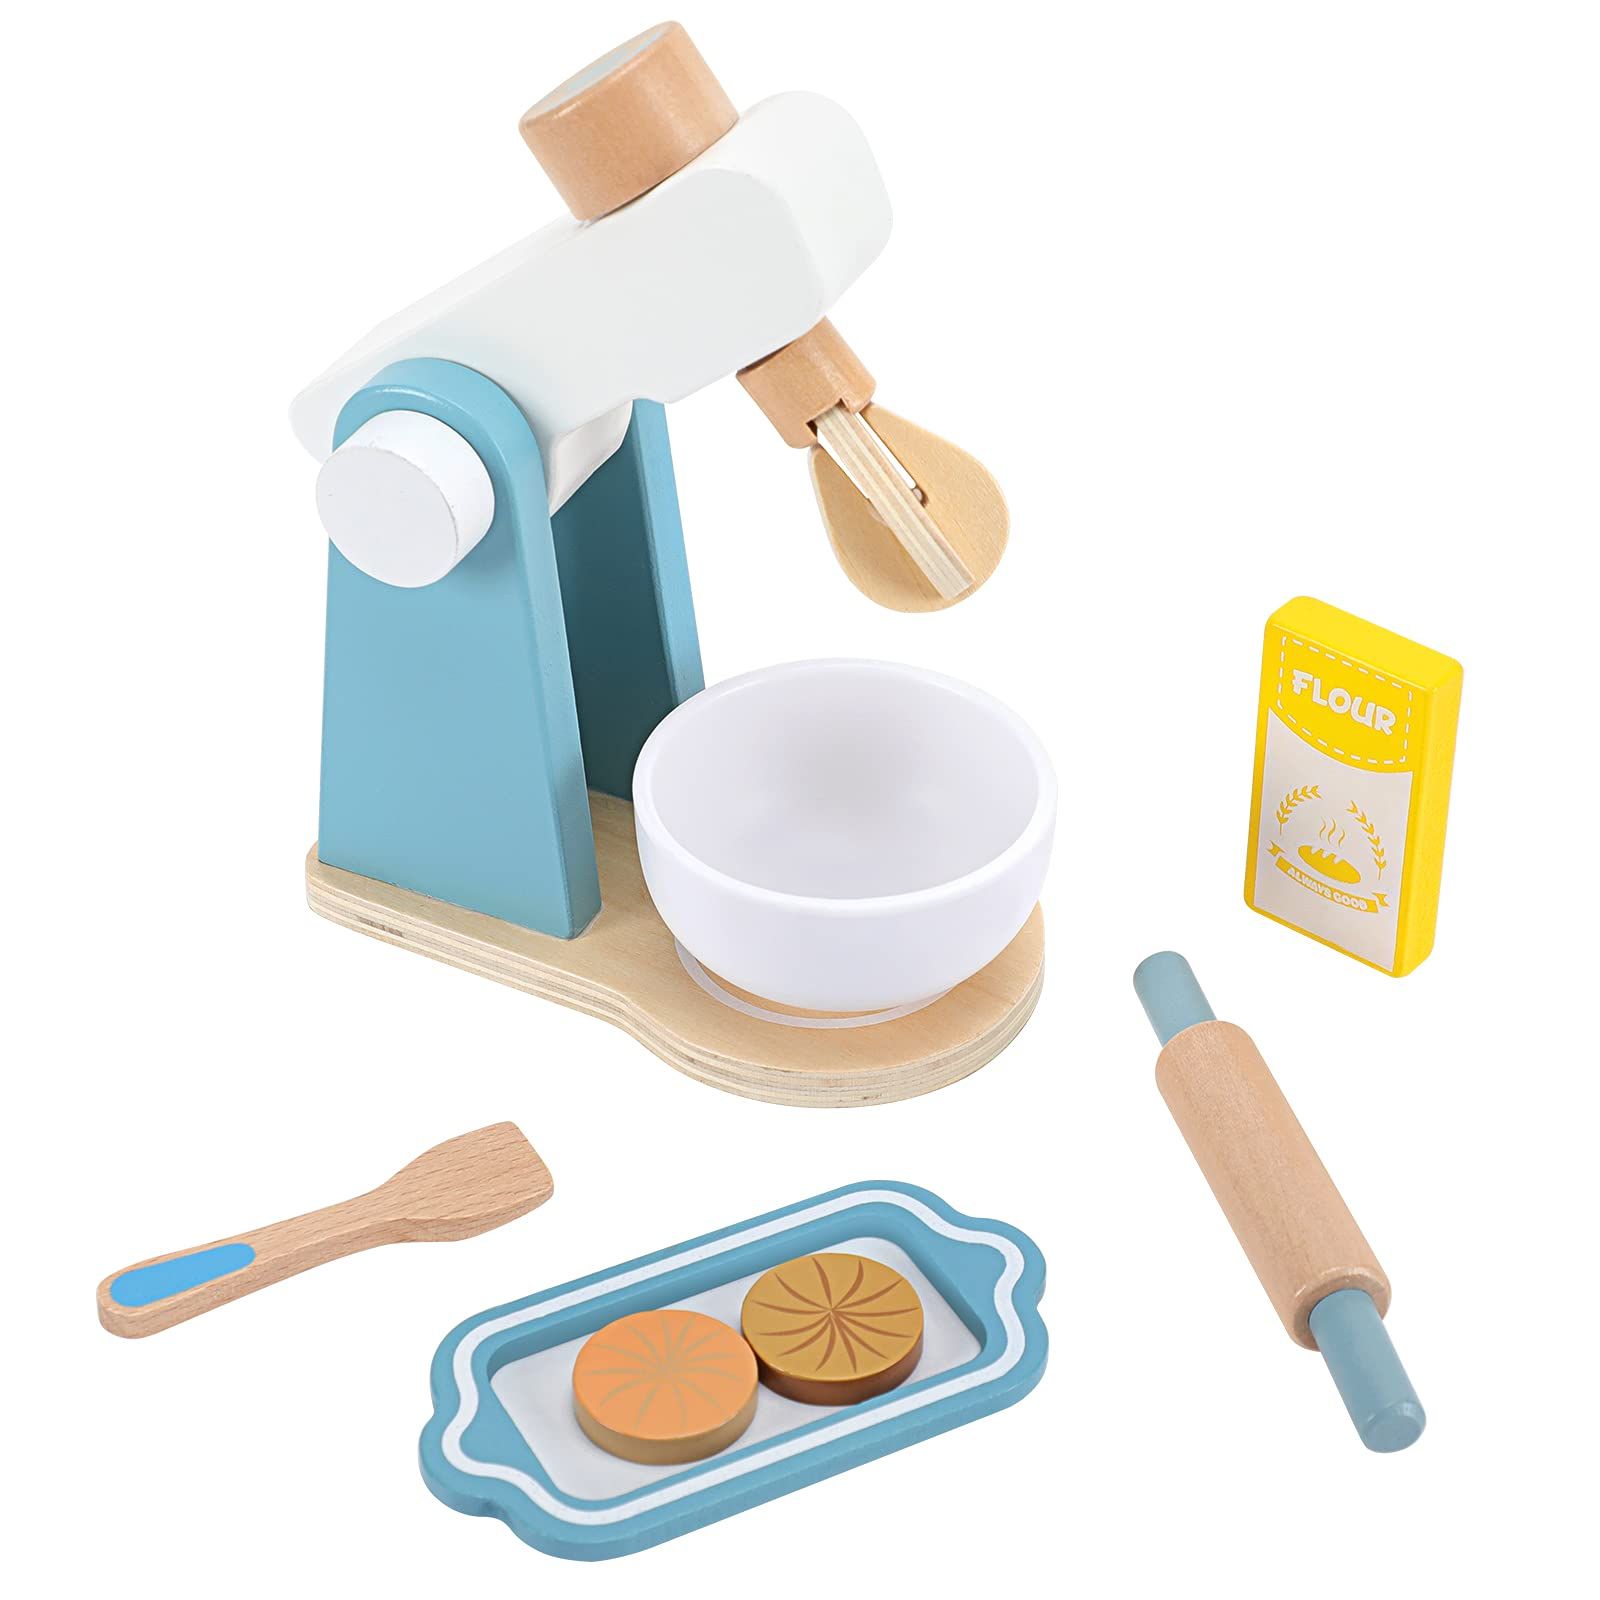 WHOHOLL Wooden Kitchen Toys, 8 Pcs Mixer Toy Set Play Kitchen Accessories with Rolling Pin Cookie fo | Amazon (US)